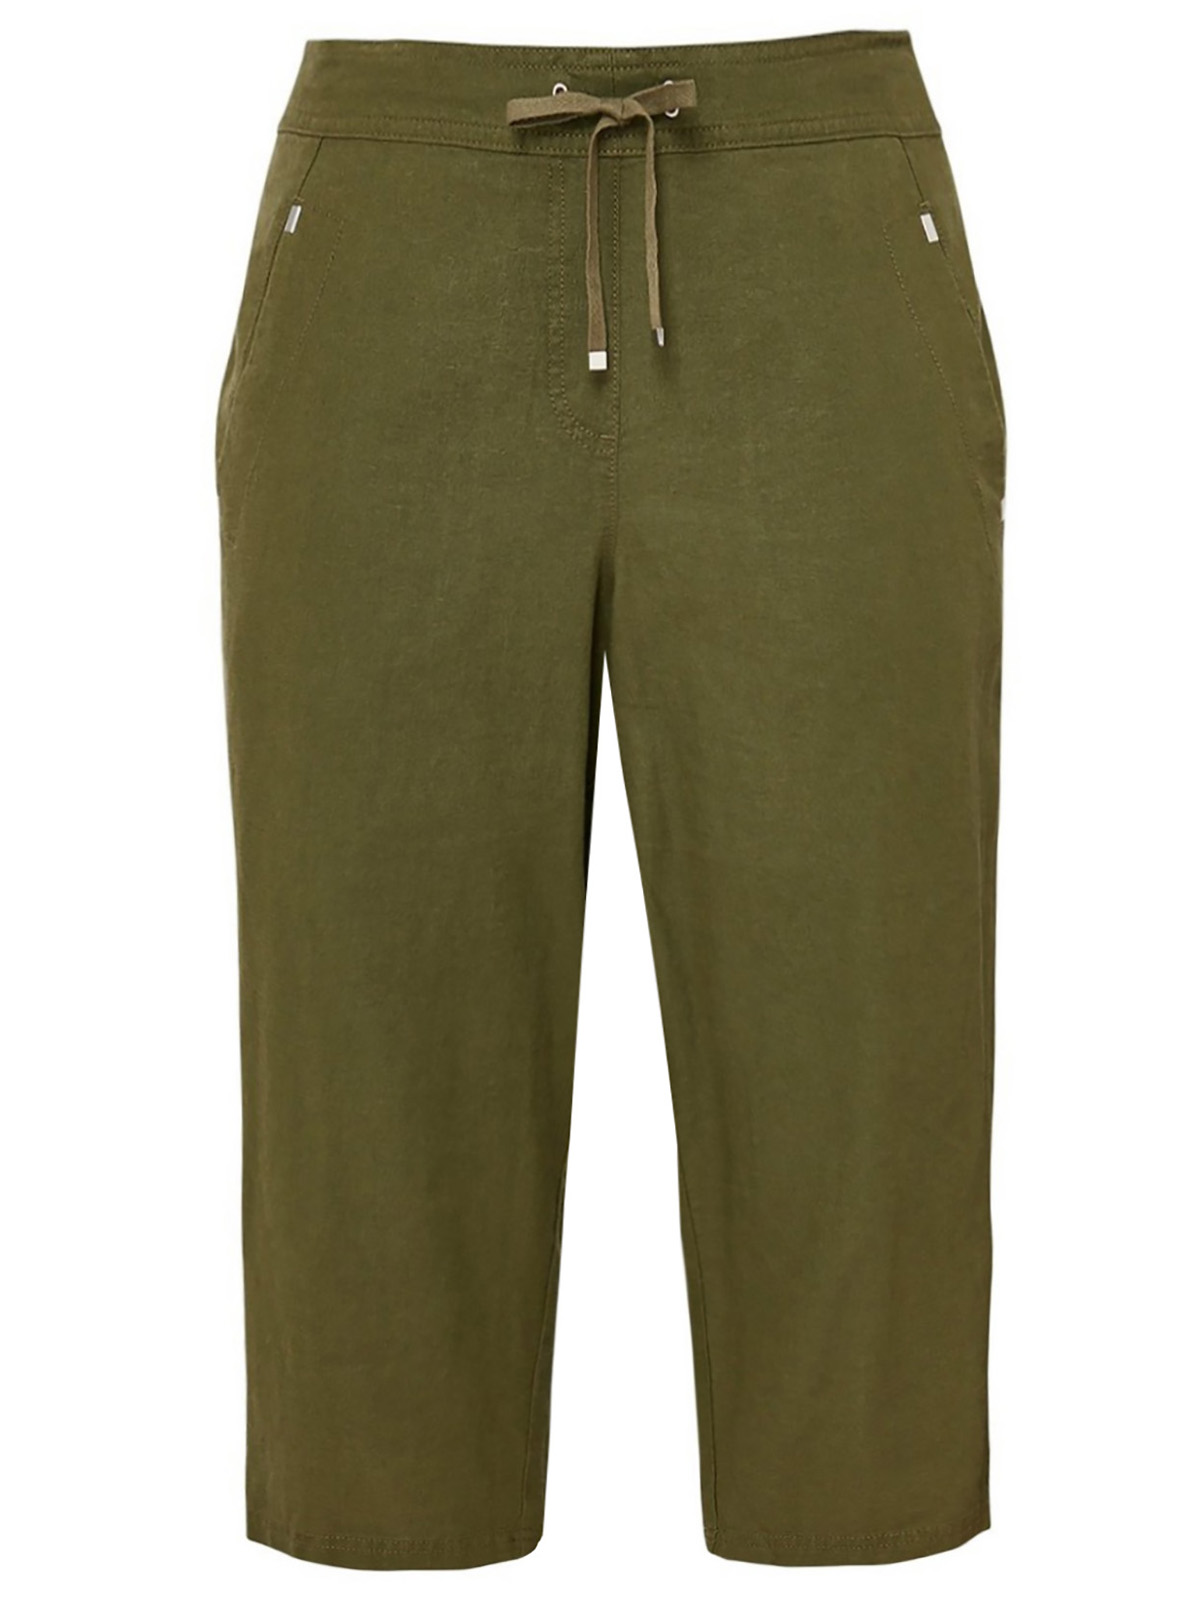 KHAKI Linen Blend Pull On Cropped Trousers - Plus Size 16 to 28